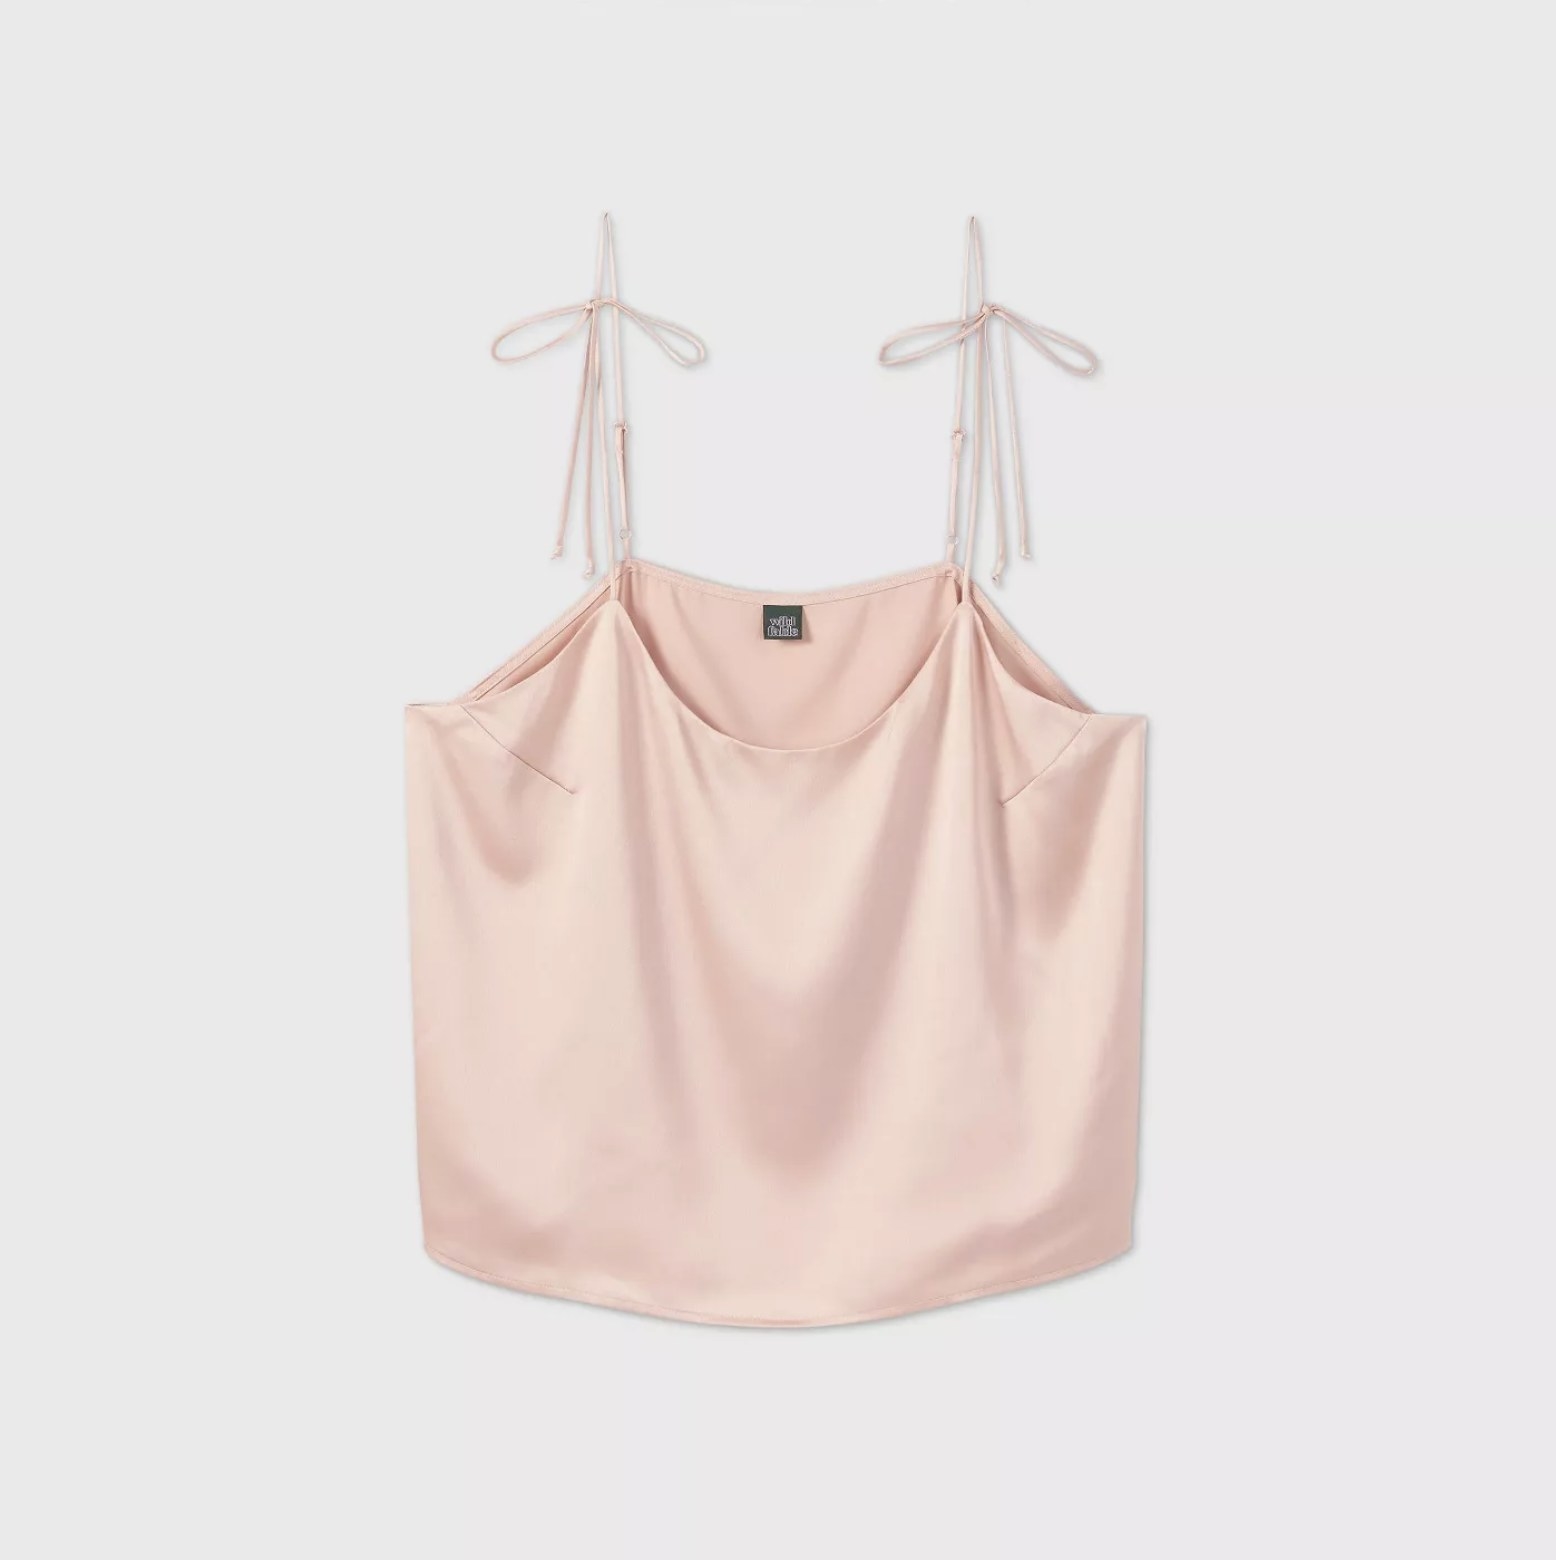 Light pink cami with tie-detailing on the straps